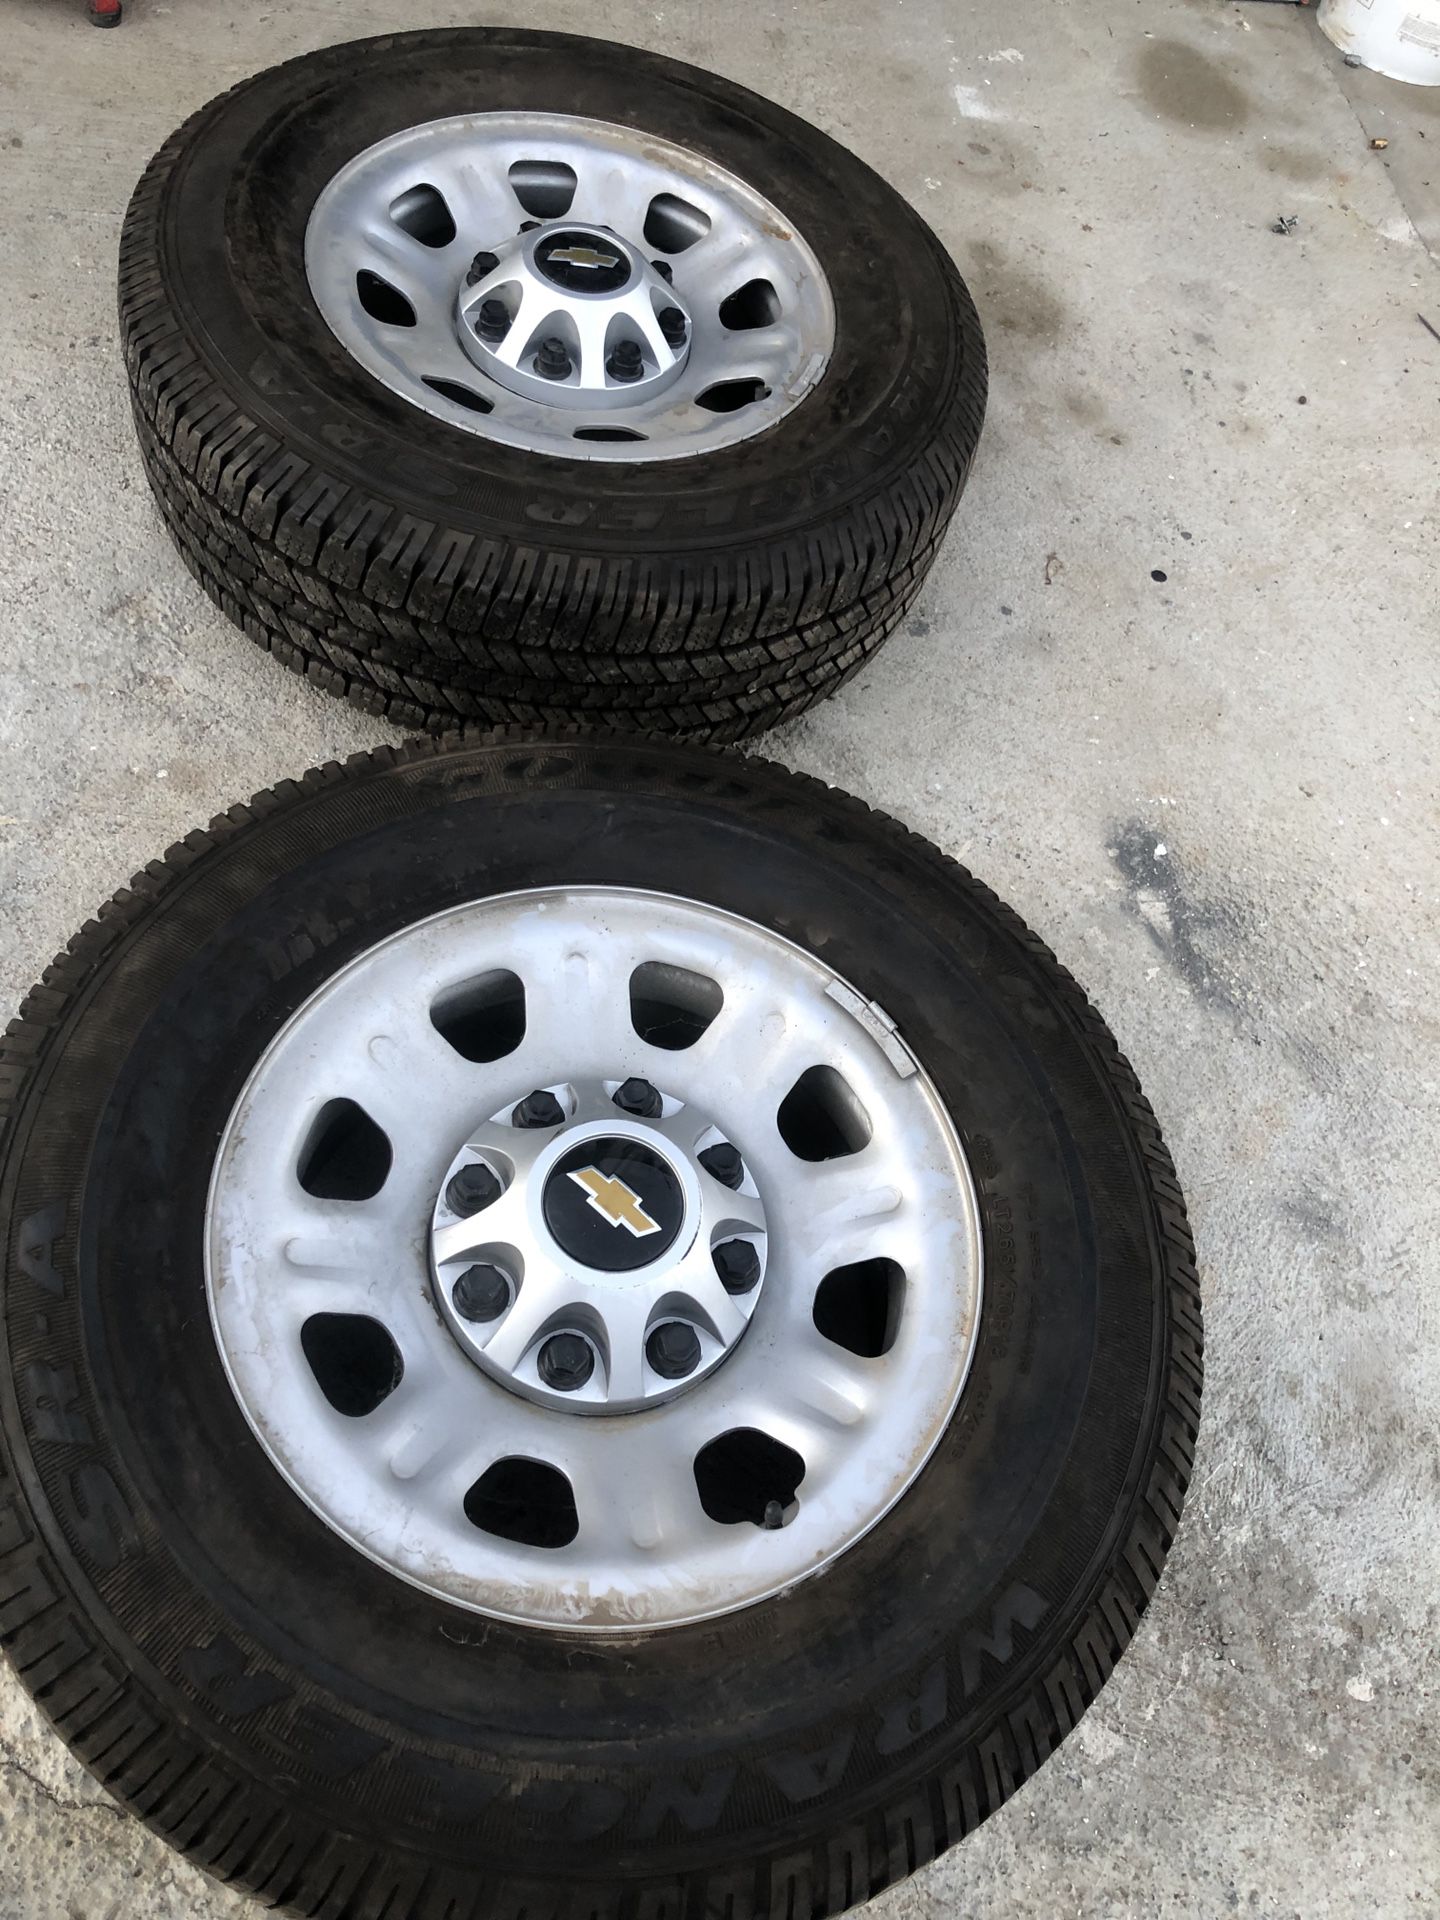 2019 Chevy tires Goodyear